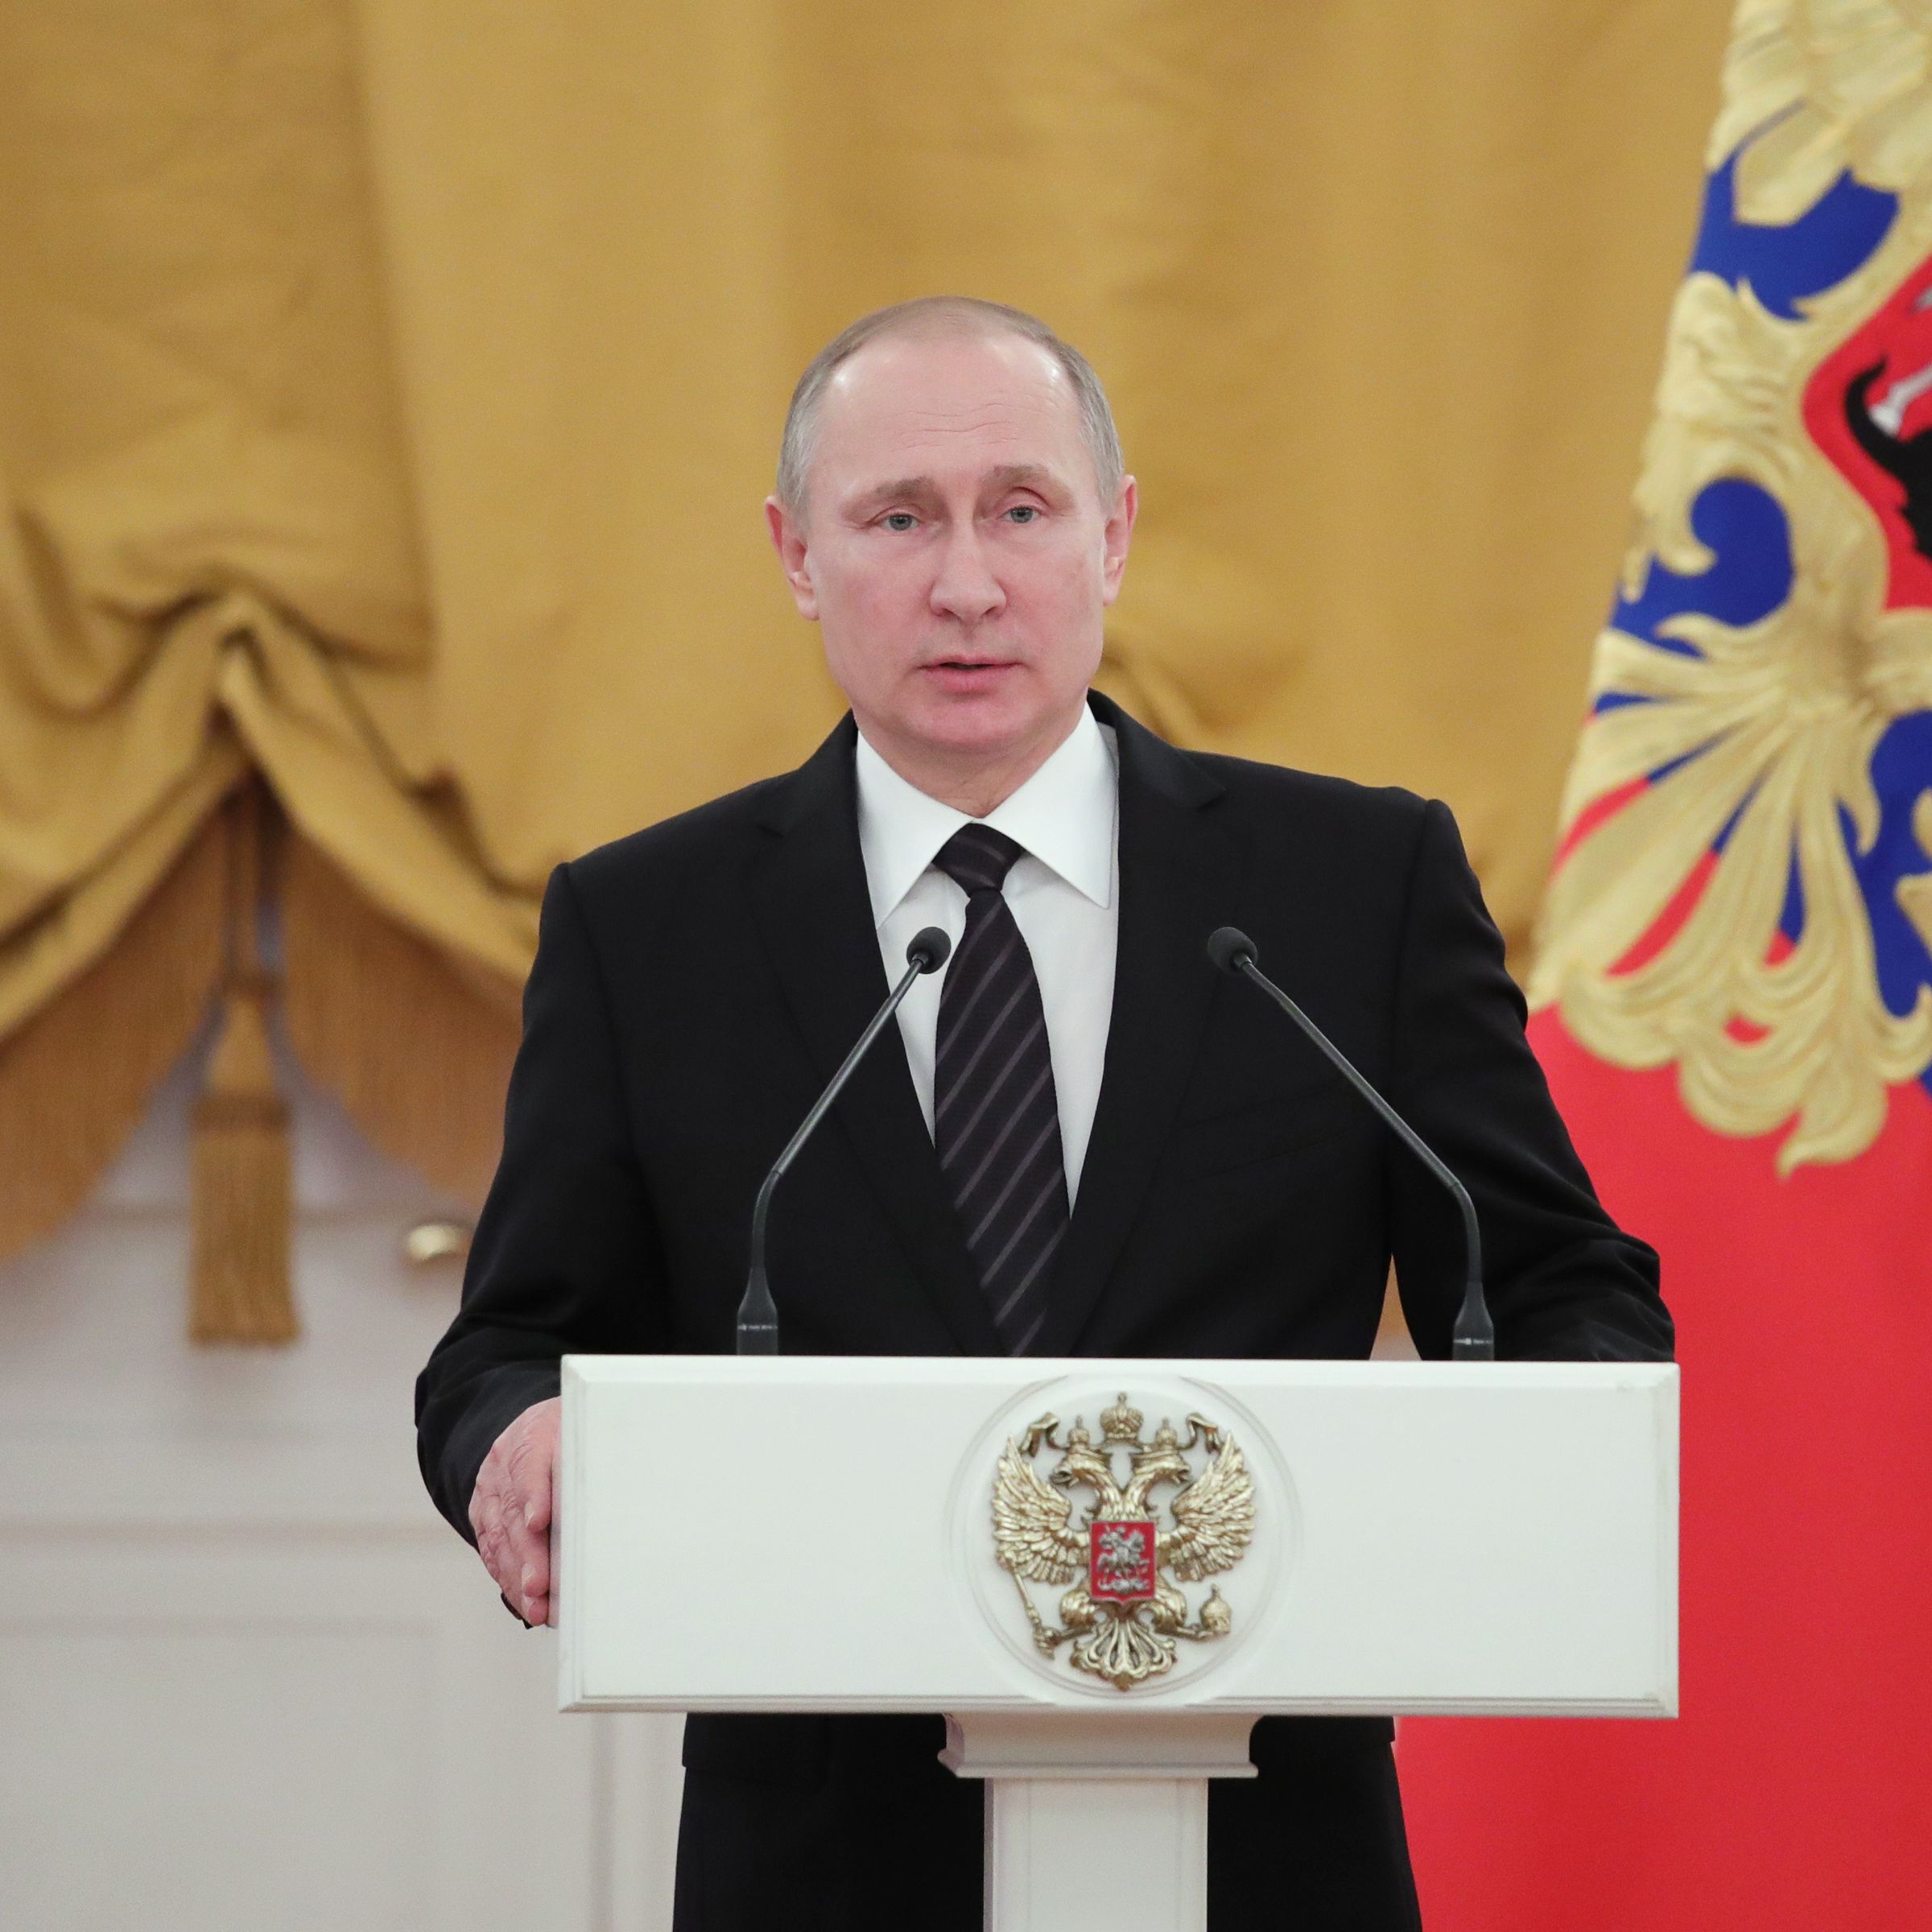 President Putin hosts reception for upcoming Year 2017